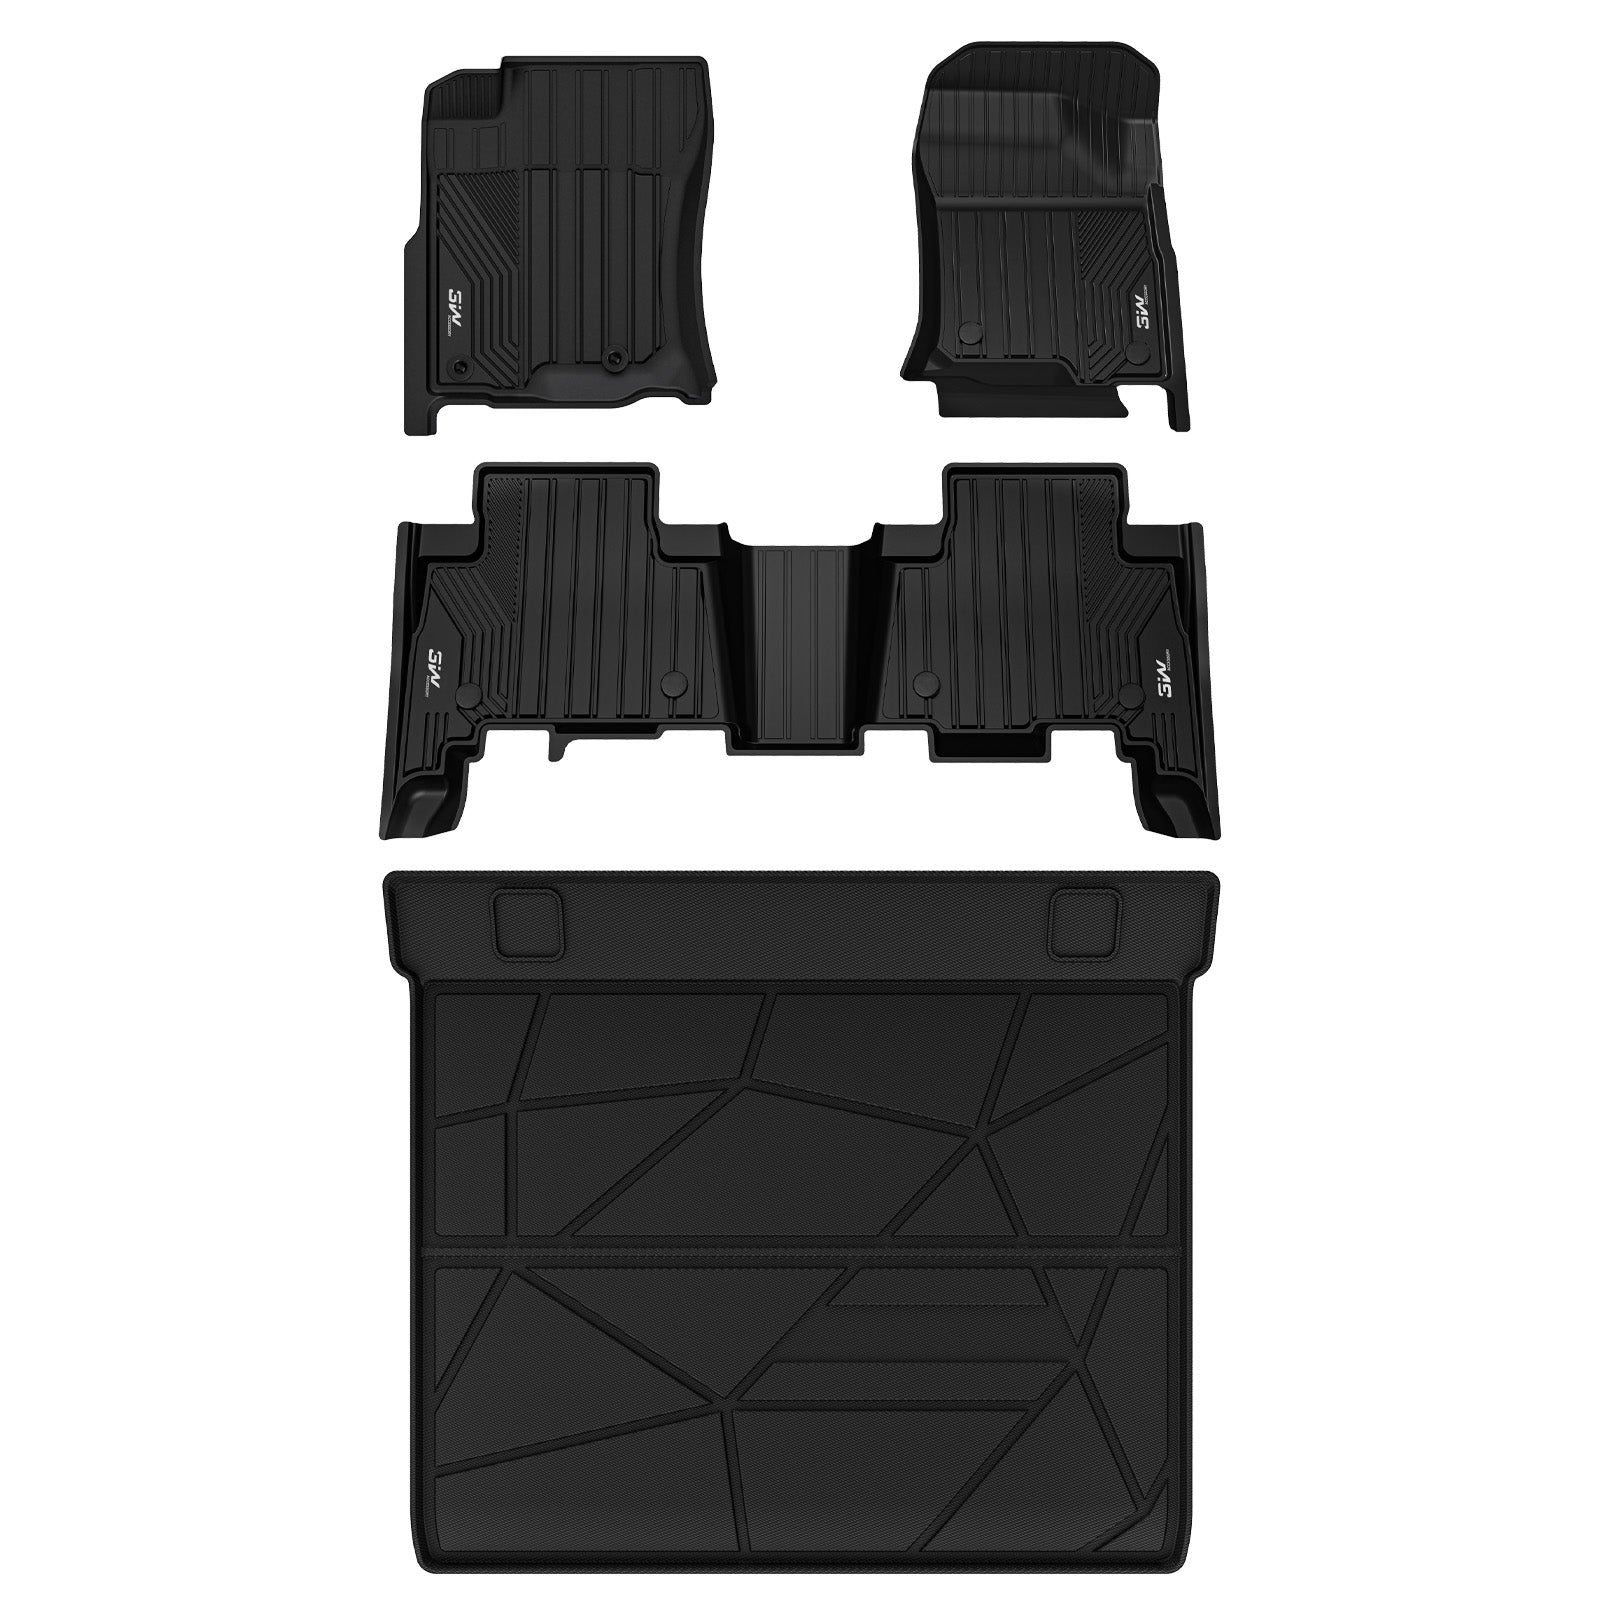 3W LEXUS GX460 2014-2023 (Only for 5 Seats) Custom Floor Mats TPE Material & All-Weather Protection Vehicles & Parts 3Wliners 2014-2023 GX460 2014-2023 1st&2nd Row+Trunk Mat